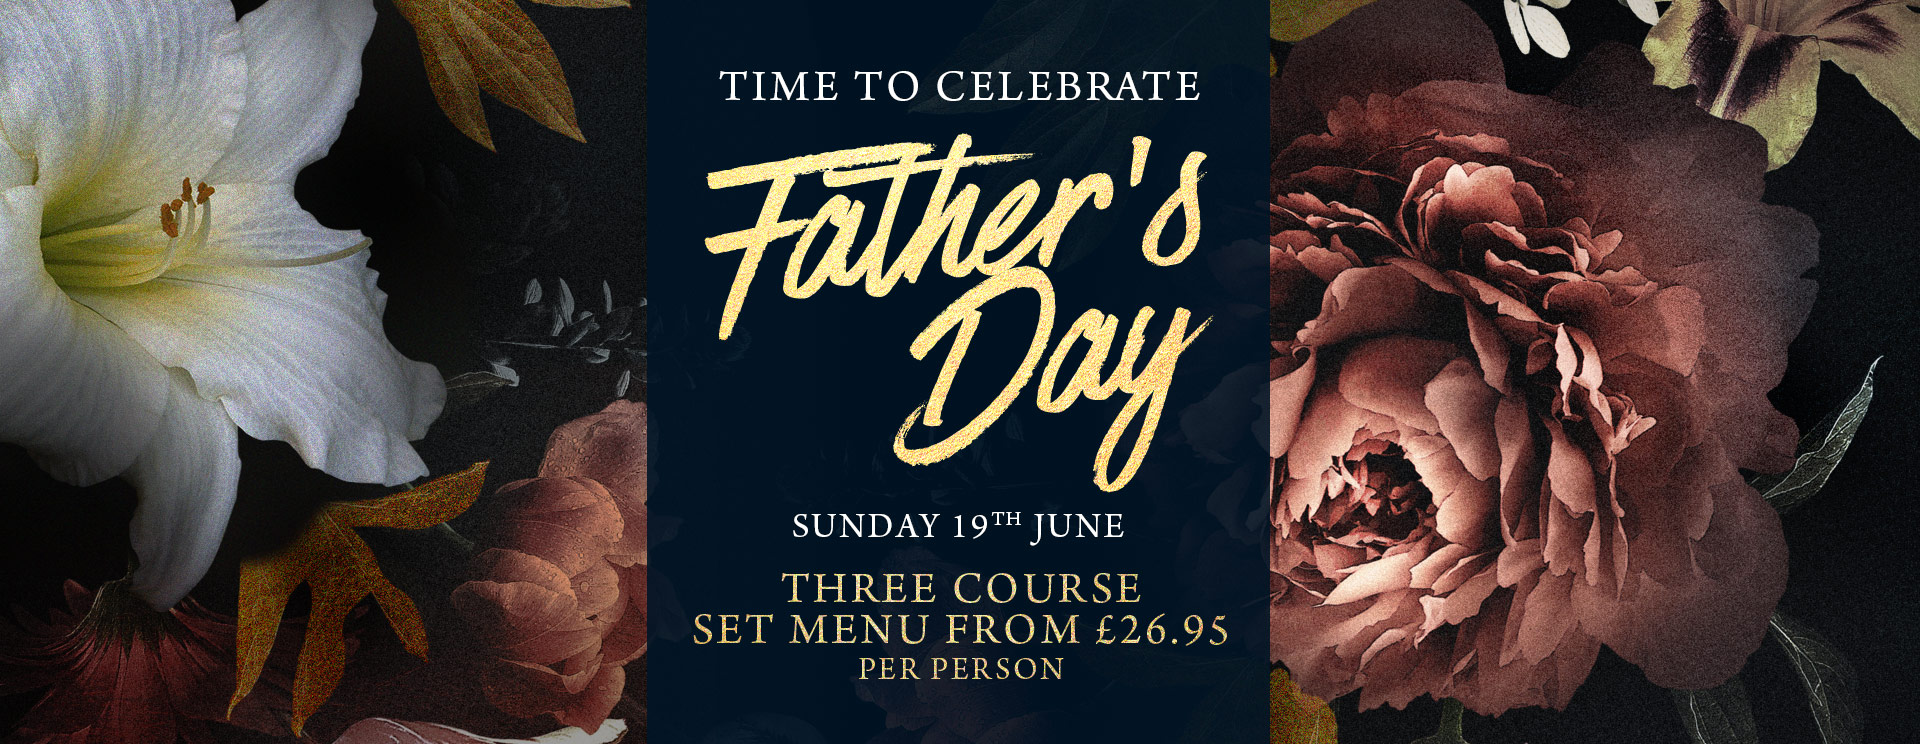 Fathers Day at The Bell Inn